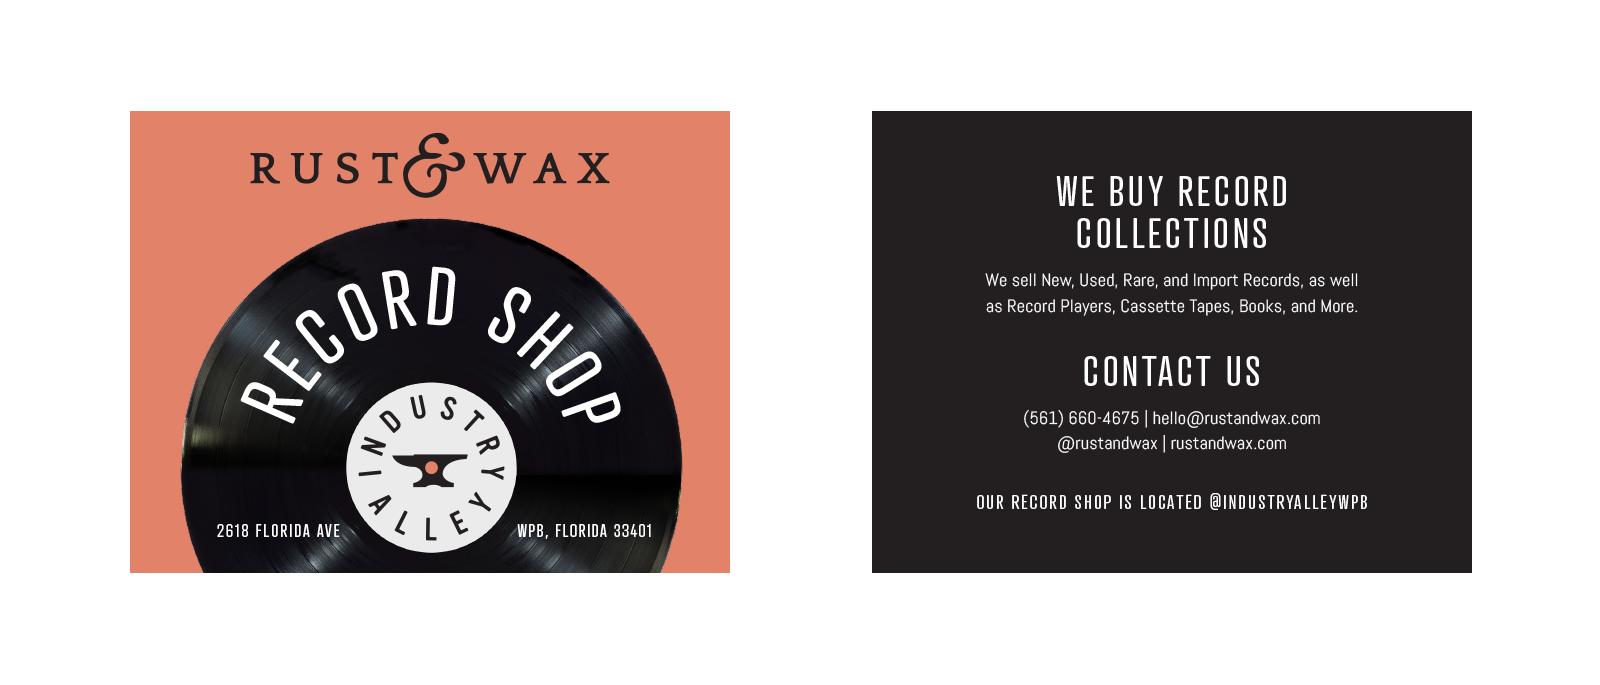 Flyer mockups for Rust & Wax Record shop in Industry Alley located in West Palm Beach. The flyer gives the business, location & contact information.